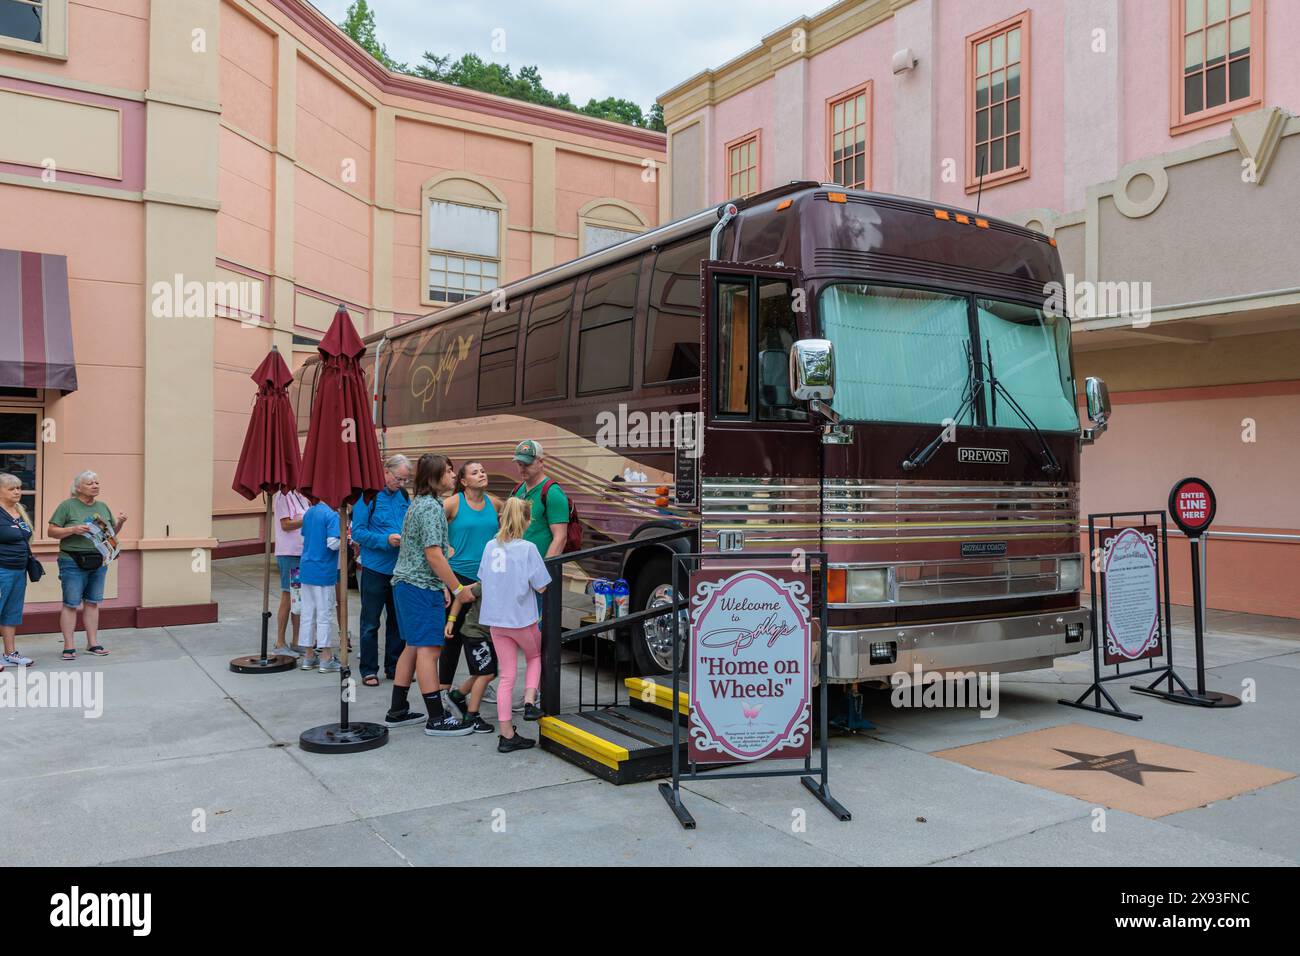 Guests line up to walk through Dolly's Home on Wheels tour bus at the Dollywood amusement park in Pigeon Forge, TN Stock Photo